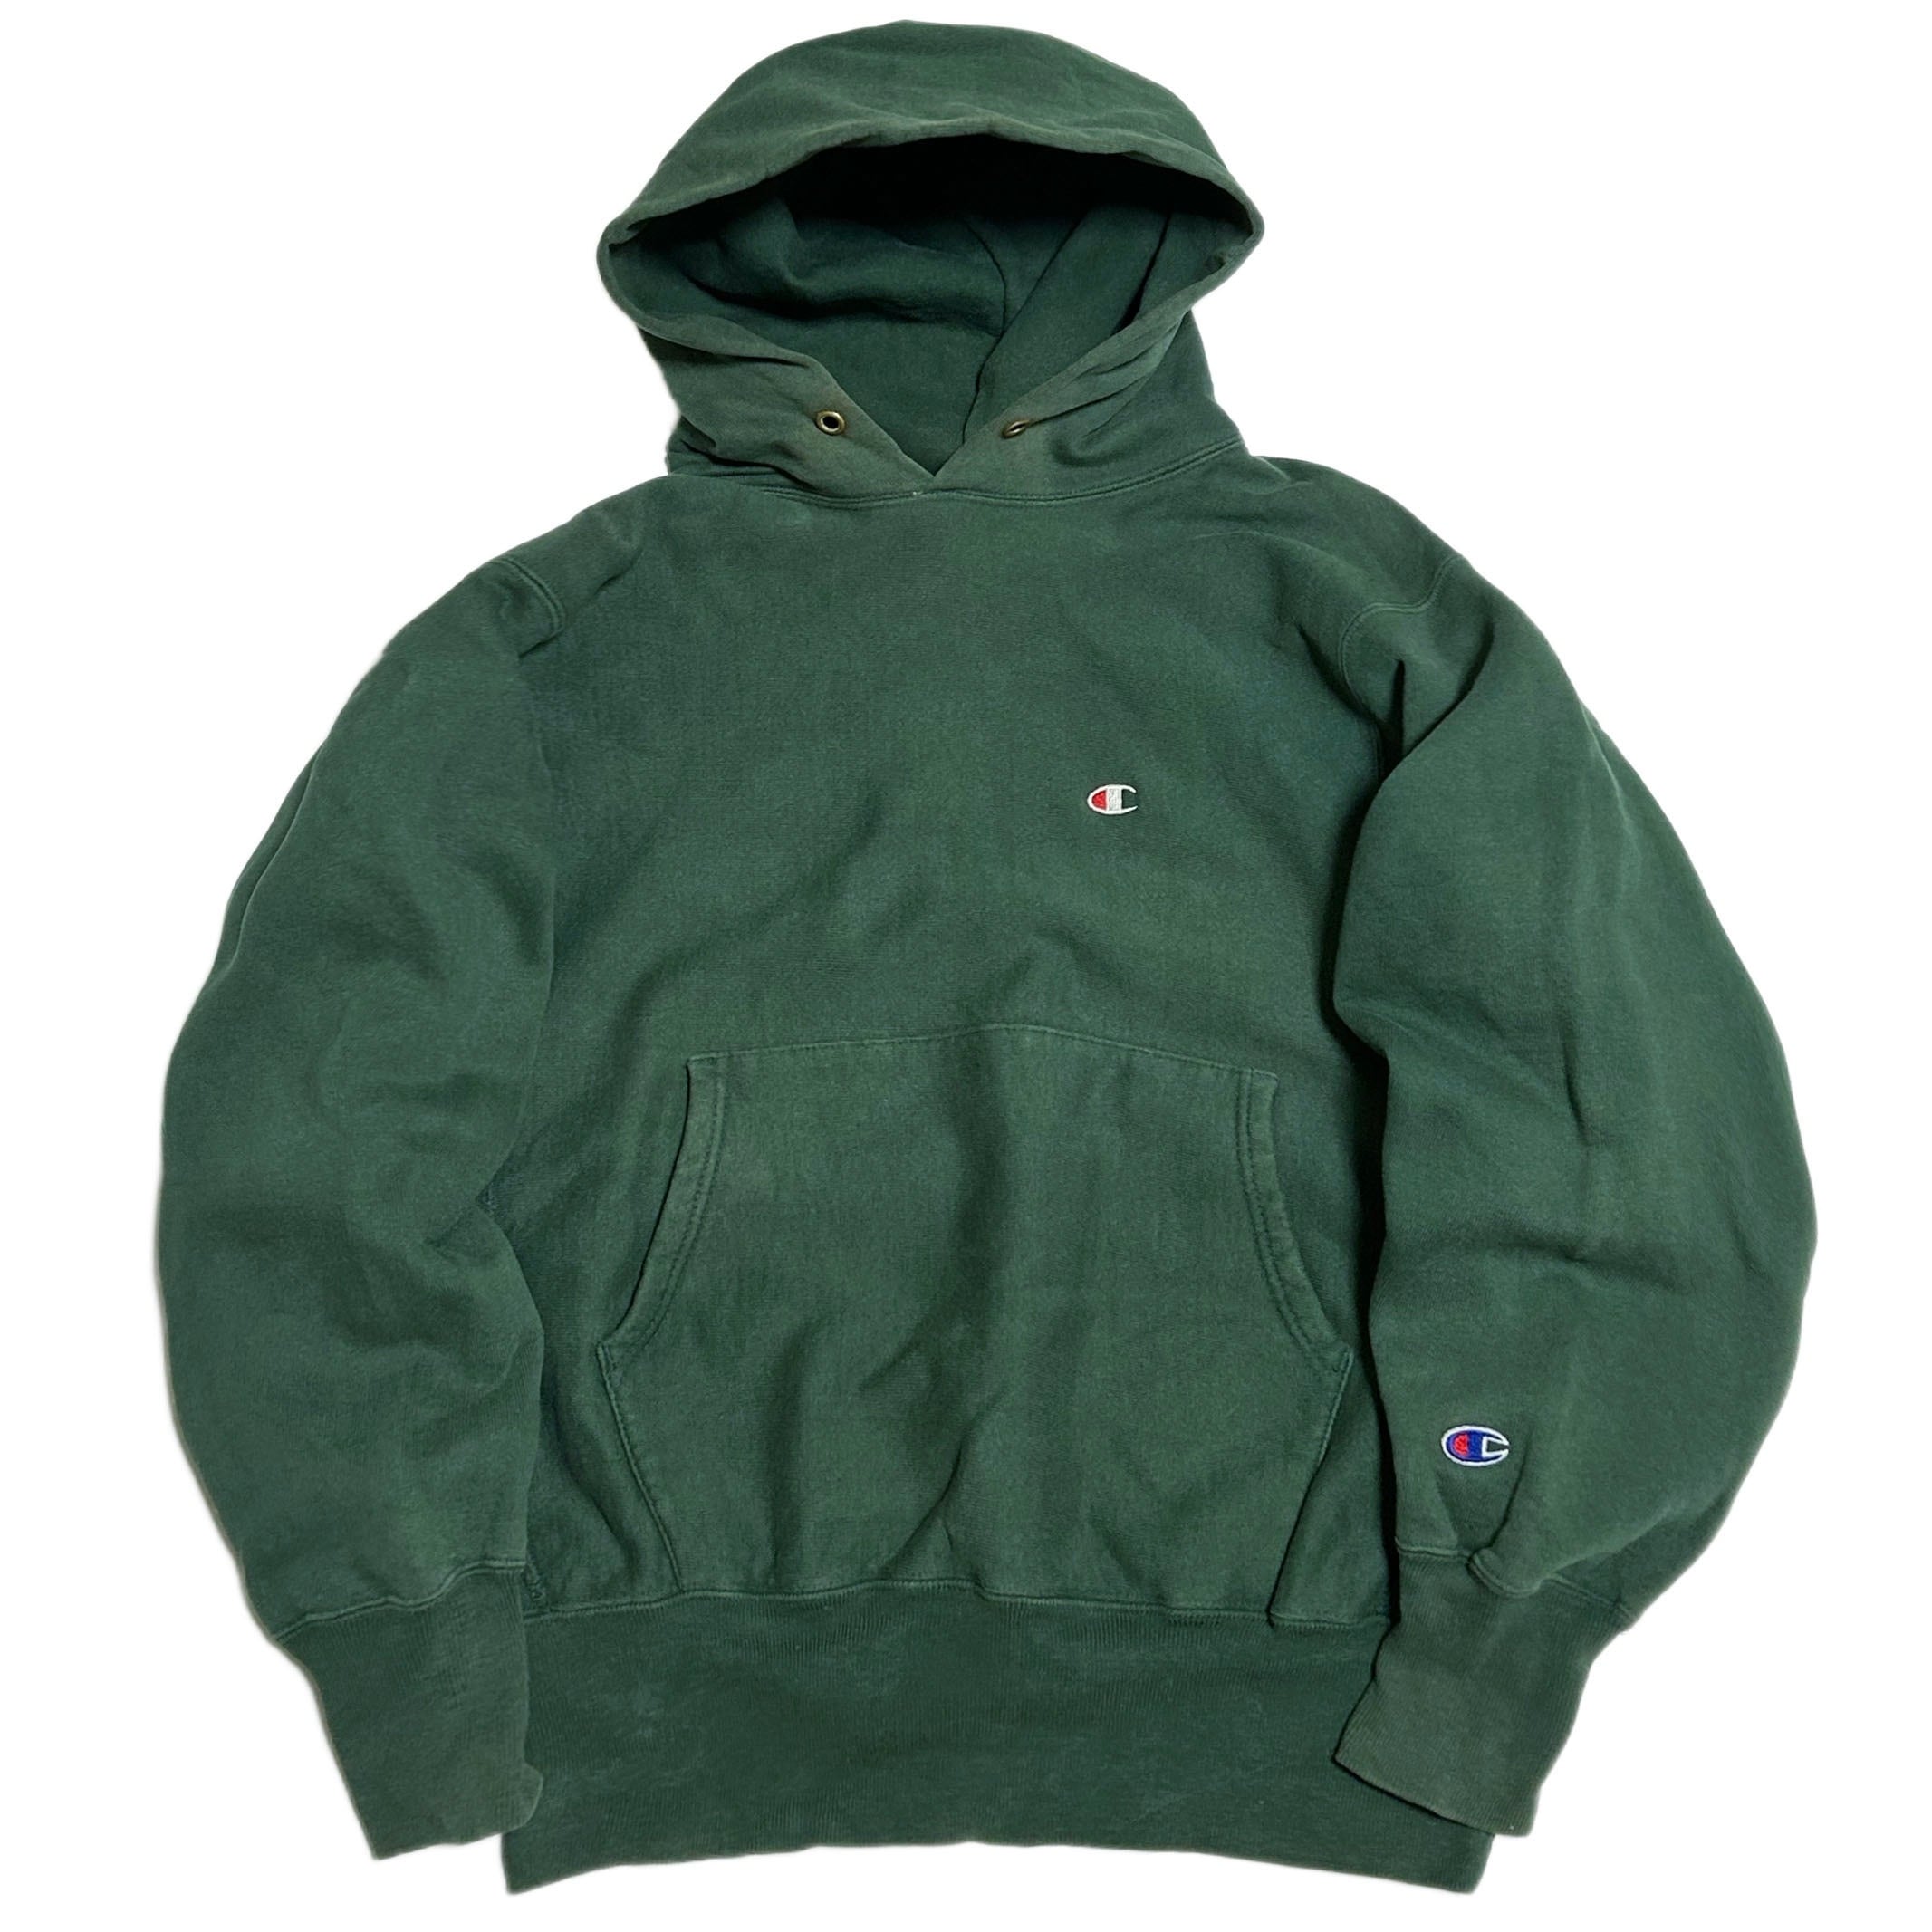 90s Champion チャンピオン リバースウィーブ パーカー 目付き グリーン【Ｍ】 フーディー MADE IN USA RW-479 |  BACK IN THE DAYZ. powered by BASE